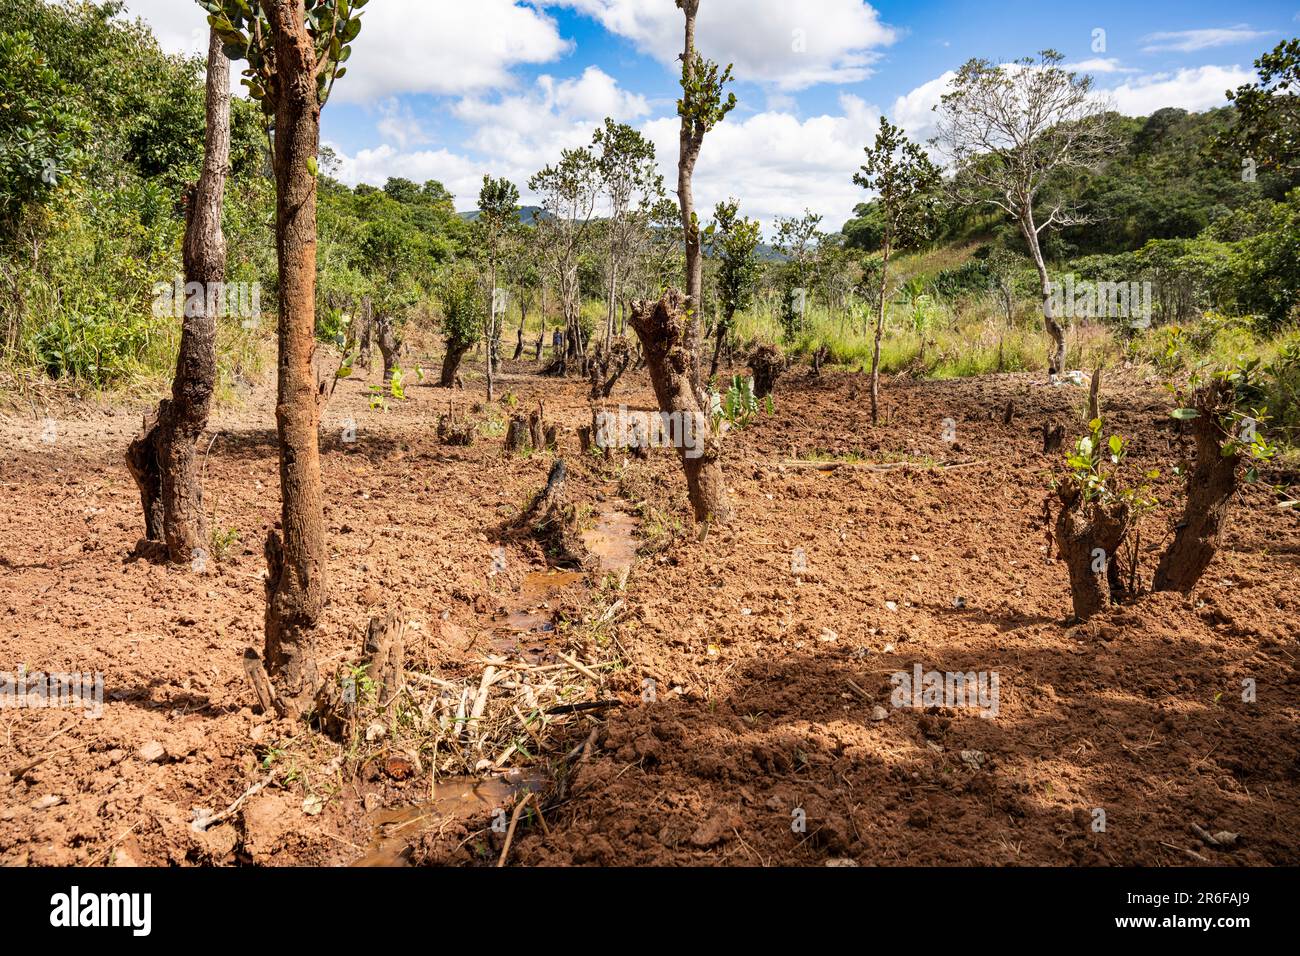 Agriculture and deforestation in a river valley bottom in northern Malawi Stock Photo